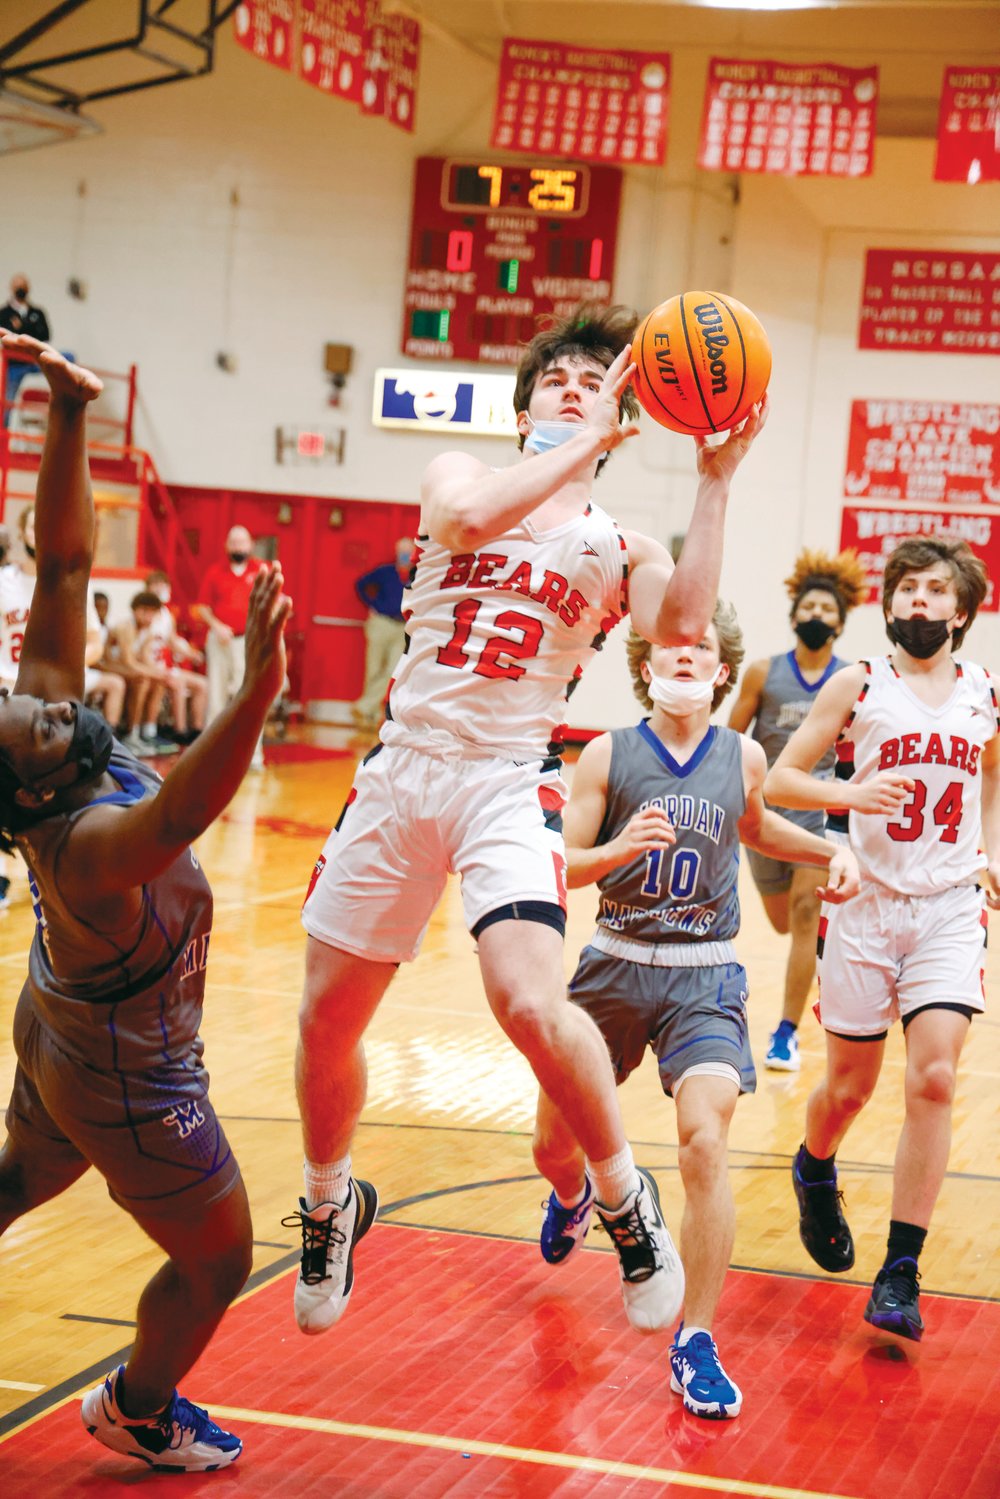 Chatham Central senior Colin Lagenor (12) weaves through the air to put up a floater in the Bears' 69-41 win over the Jordan-Matthews Jets last Friday. Lagenor (16 points) is one of the team's veteran leaders, accoding to Head Coach Robert Burke, who praised Lagenor's ability to fight in the paint against bigger competition.